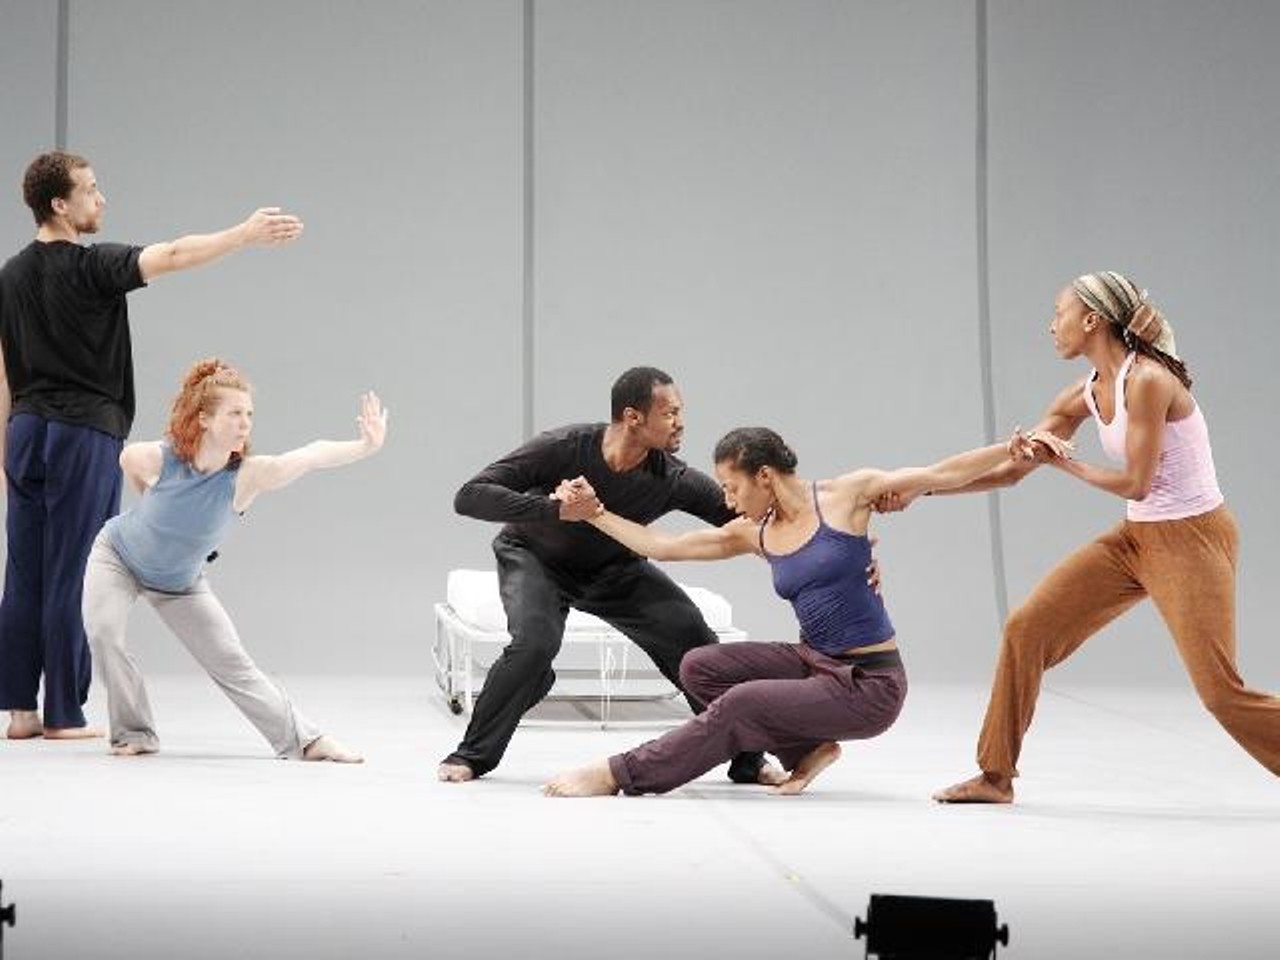 DANCECleveland Presents: Bill T. Jones/ Arnie Zane Dance Company 
When: Sun., Oct. 9, 3-4:30 p.m. 
Phone: 330-972-7570 
Email: sarah@dancecleveland.org 
Price: $25- $55 
www.dancecleveland.org
Recognized as one of the most distinguished dance makers in America, Bill T. Jones has developed both exquisite and powerful repertory for his Bill T. Jones/Arnie Zane Dance Company. The Akron performance, Analogy/ Dora, is based on the harrowing, touching and inspirational story of Dora Amelan, a French Jewish nurse & social worker during World War II. Featuring live music, this work brings Jones&#146; unique ability to weave movement, storytelling and music together for an unforgettable experience.